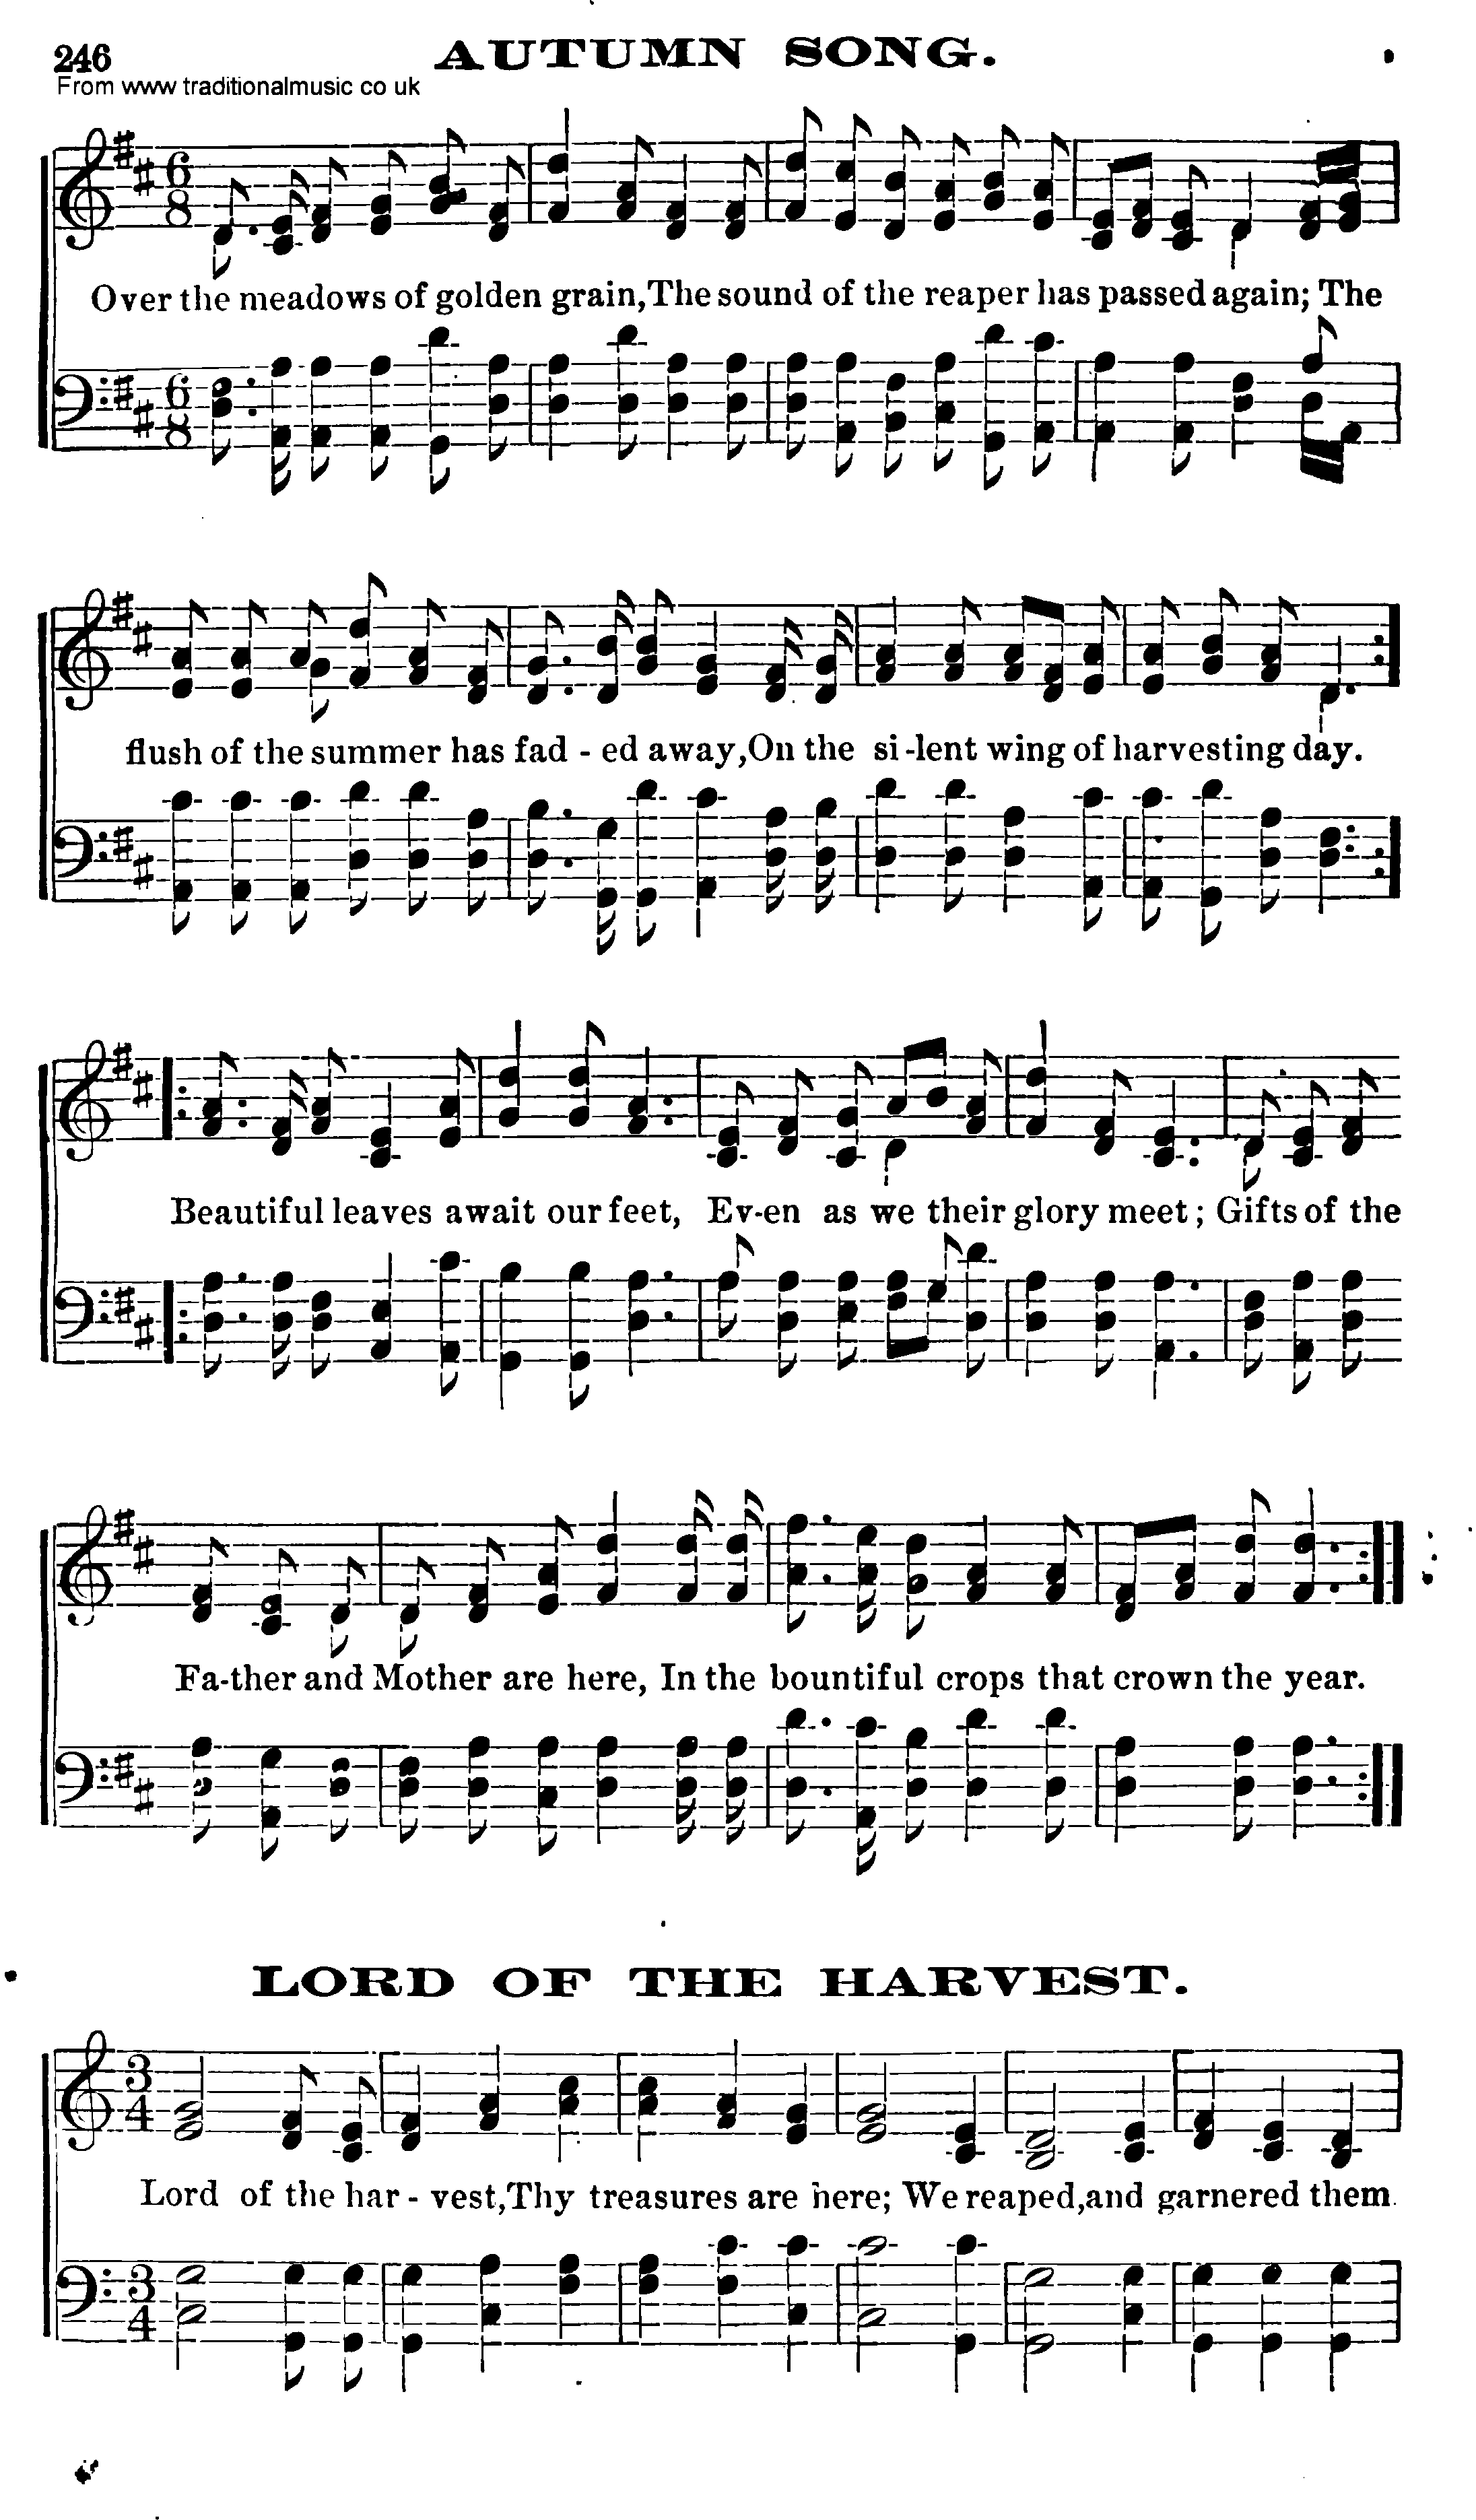 Shaker Music collection, Hymn: Autumn Song--Lord Of The Harvest, sheetmusic and PDF